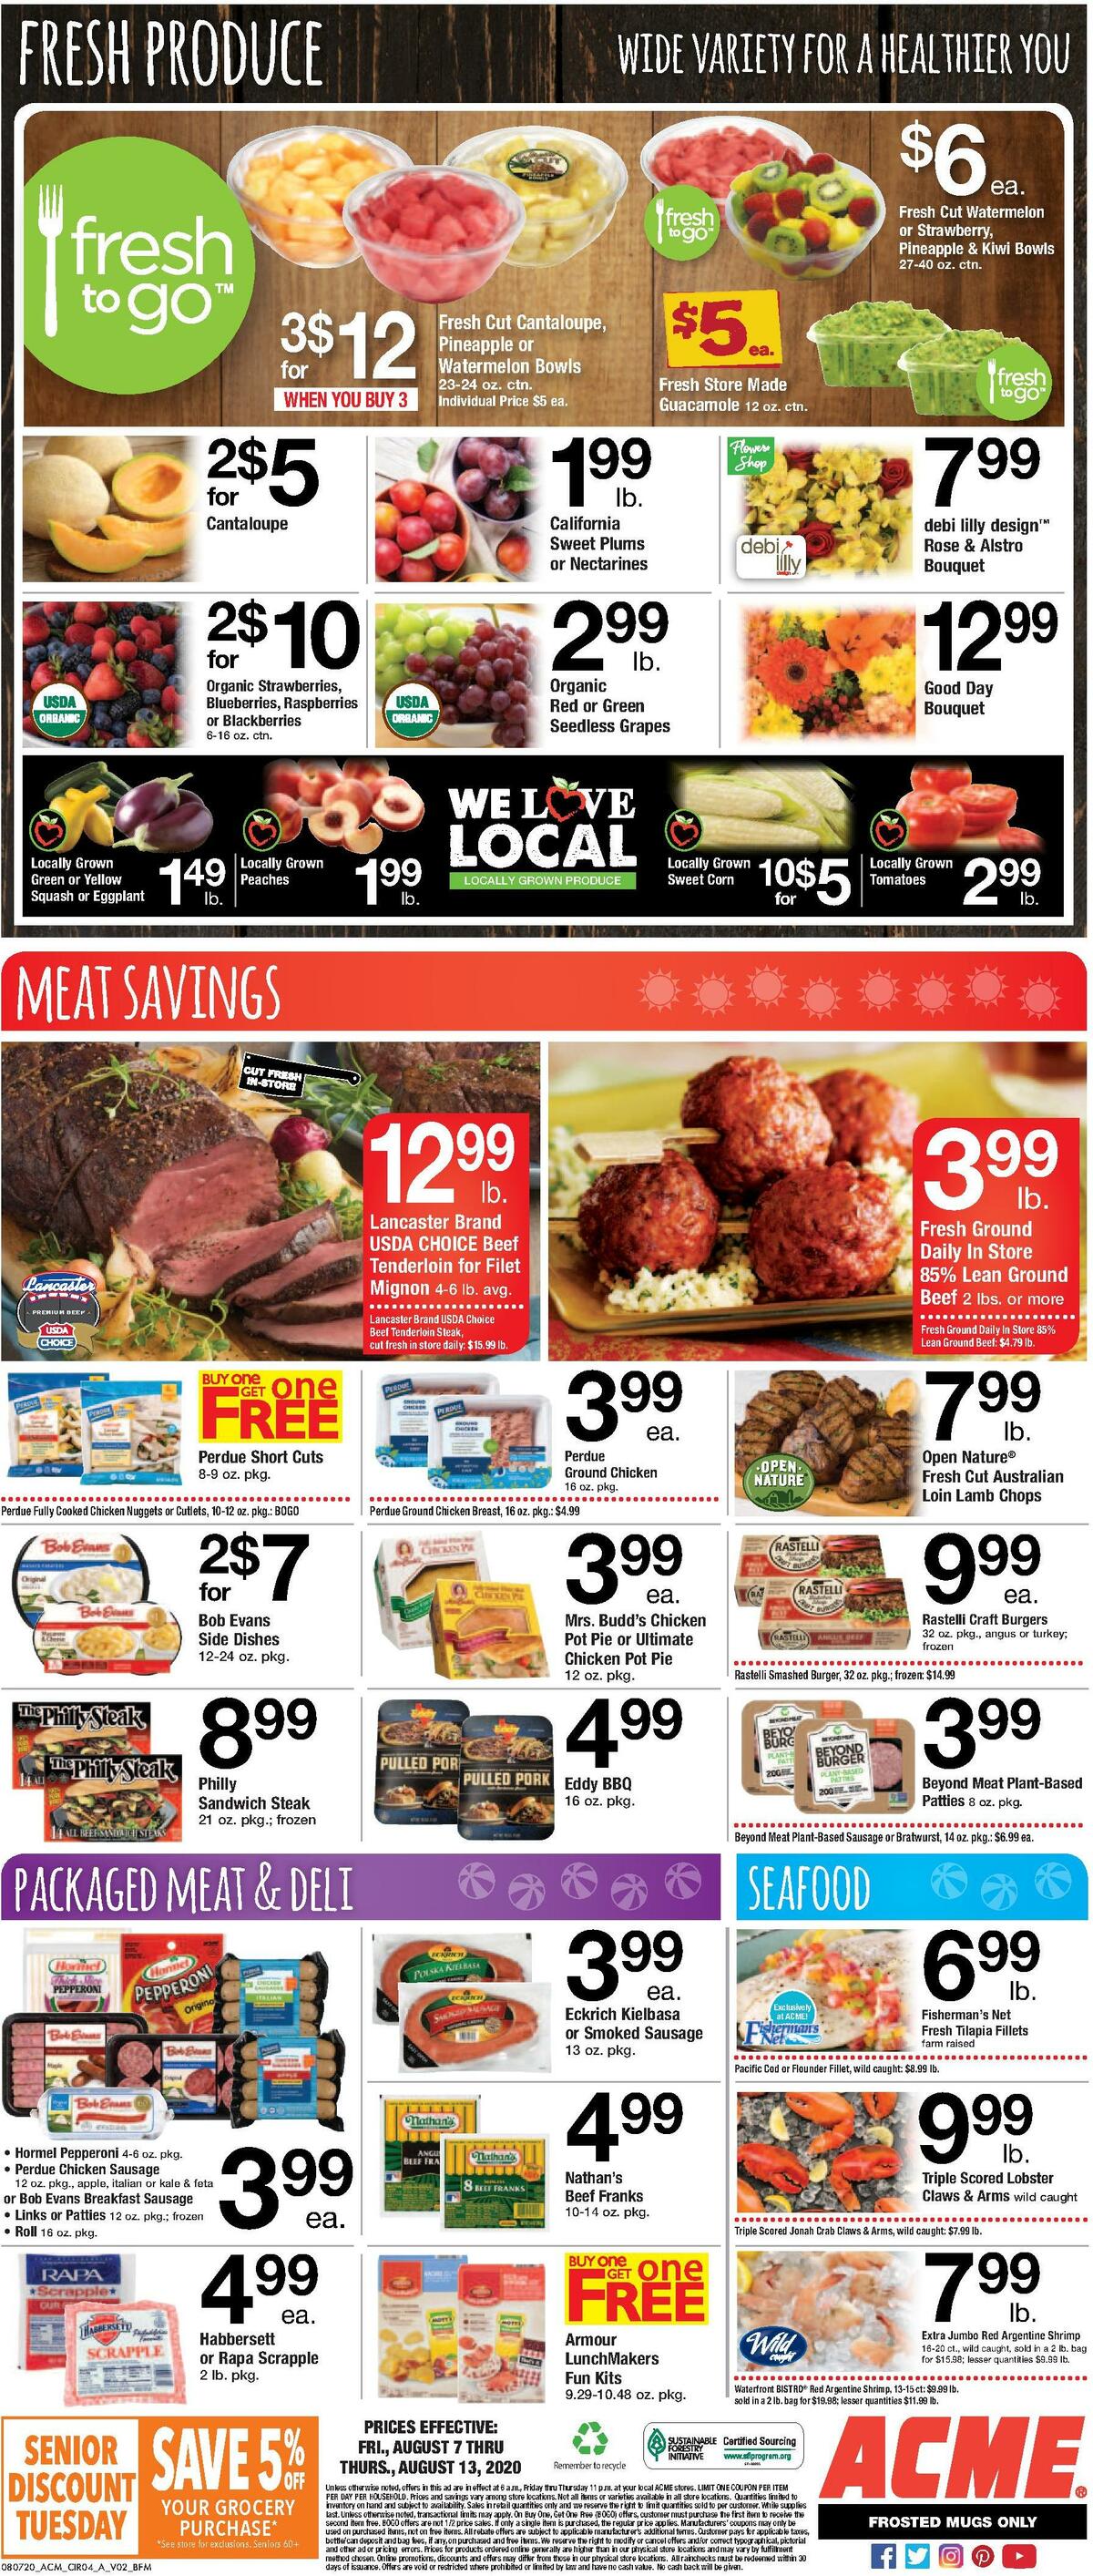 ACME Markets Weekly Ads & Special Buys for August 7 - Page 5